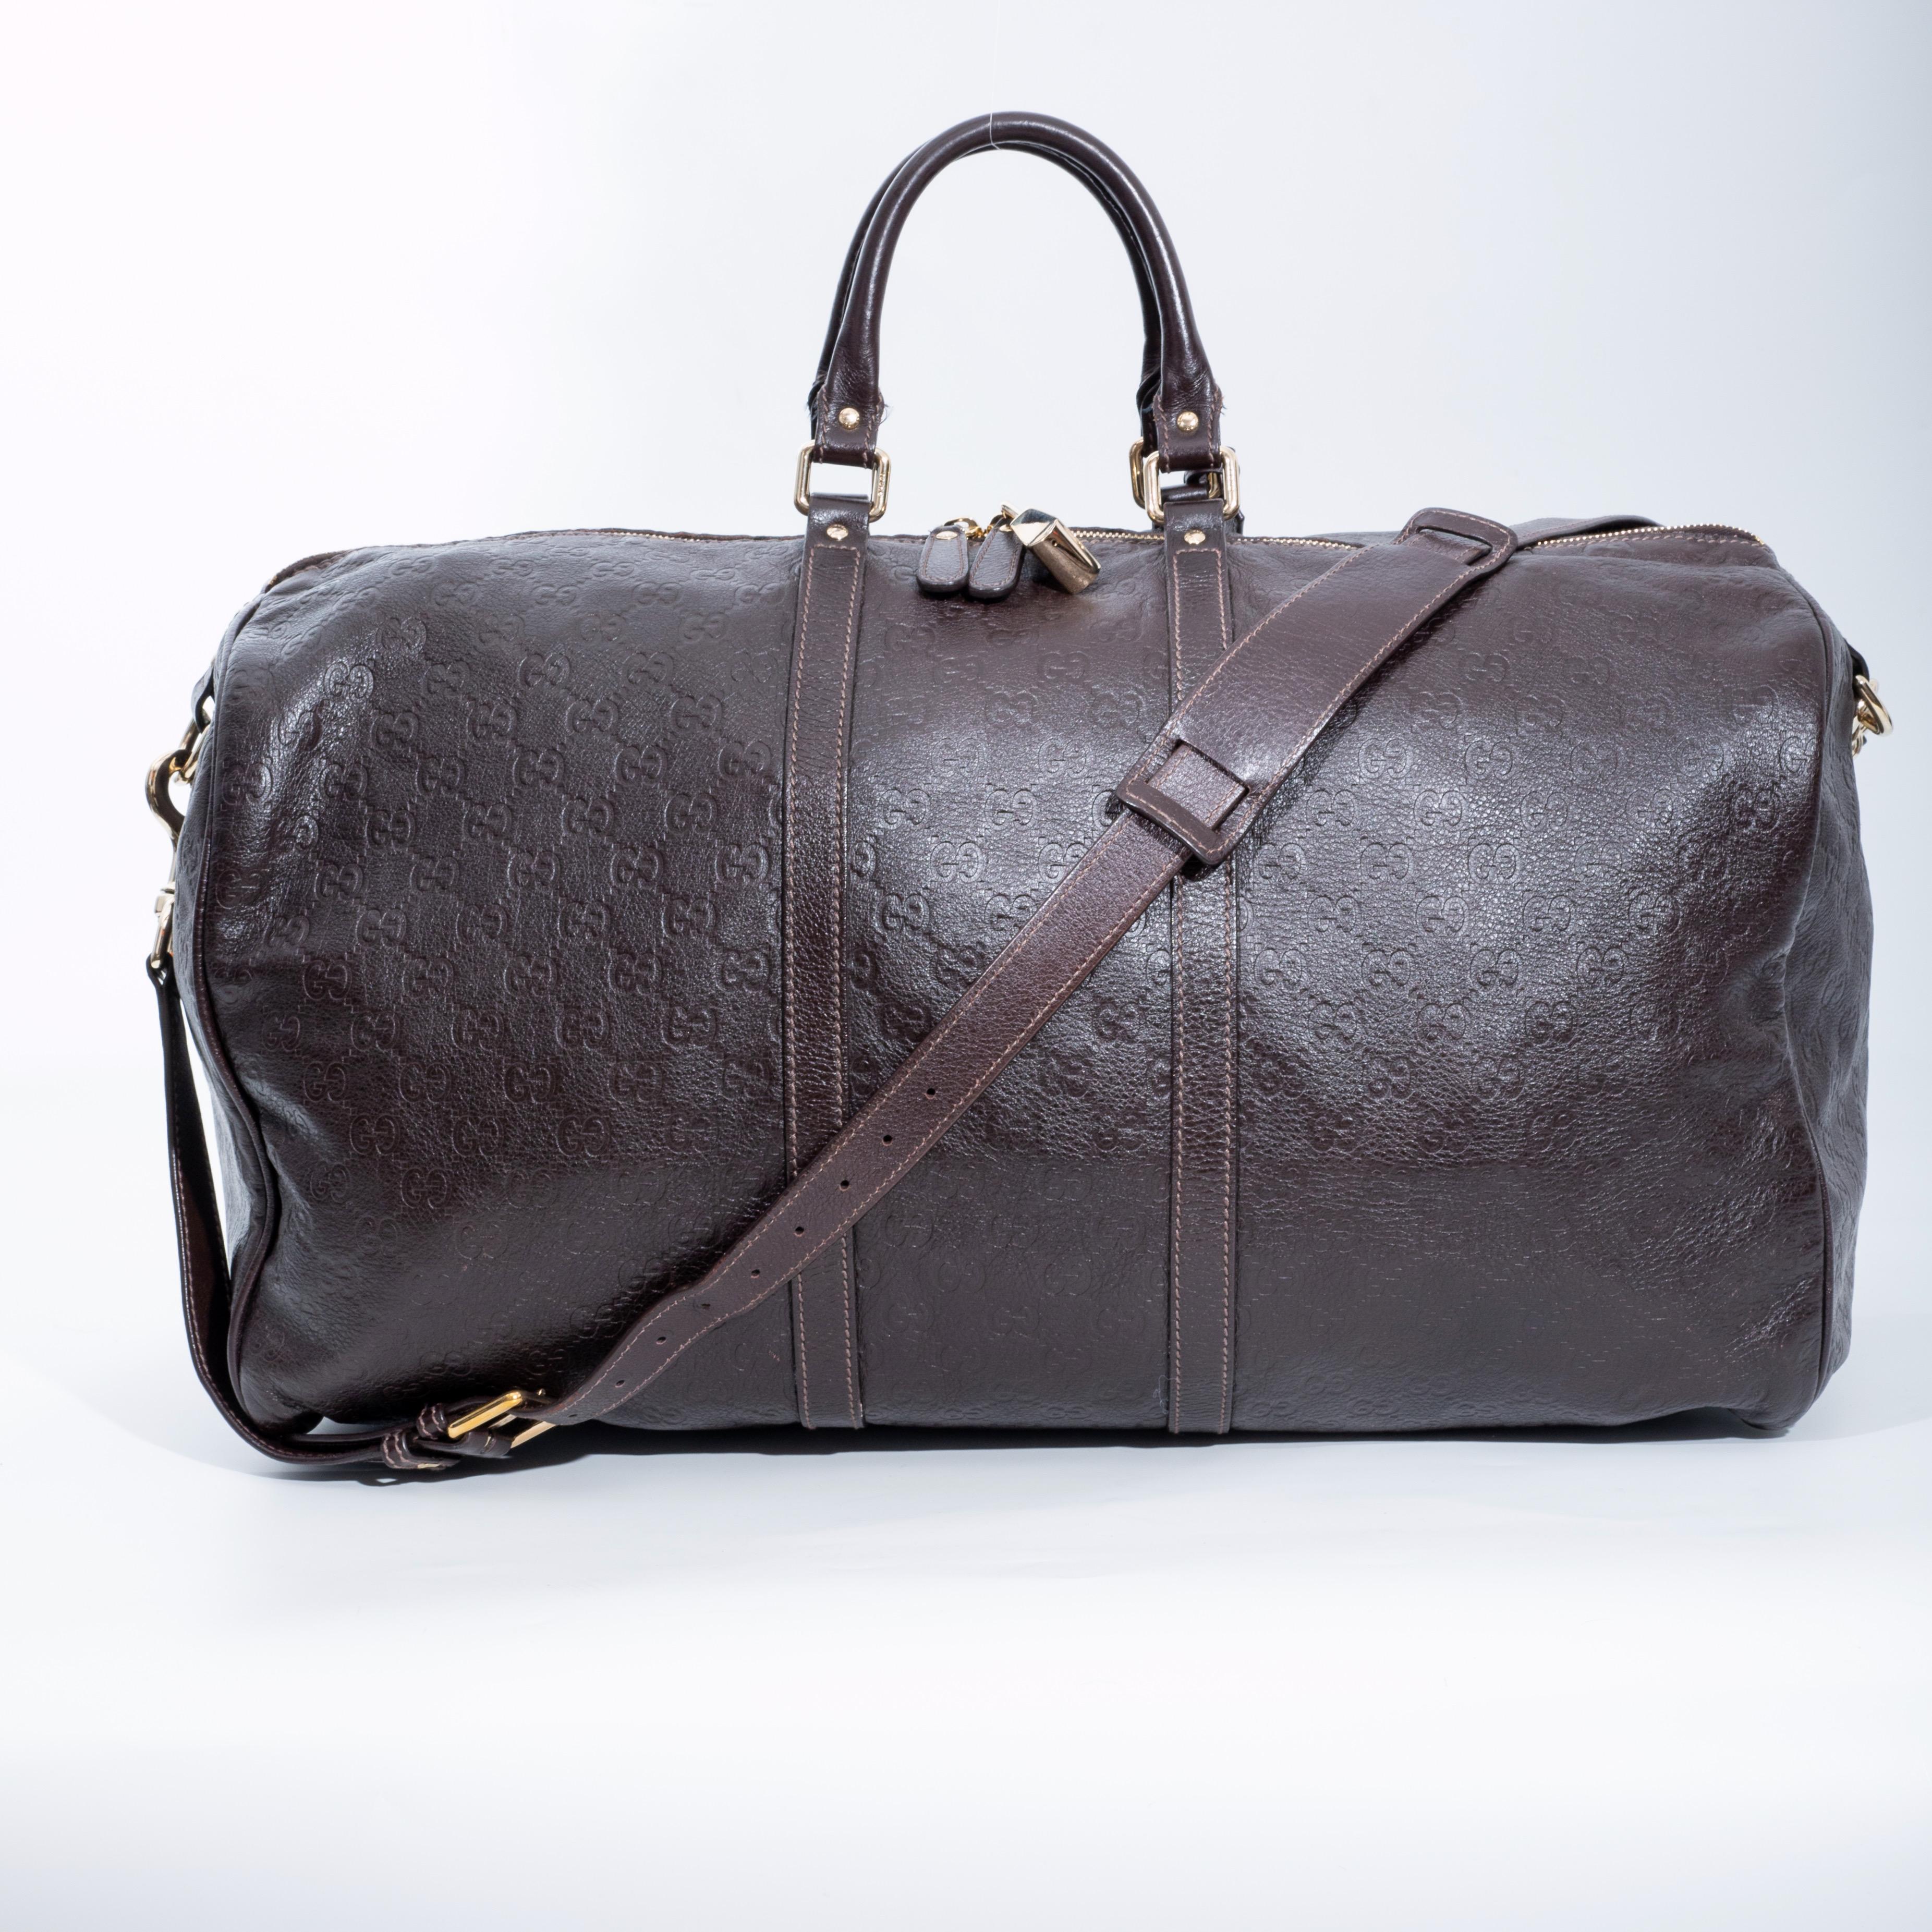 This travel duffel is made of Gucci monogram embossed Guccissima leather. The bag features rolled leather top handles, an optional shoulder strap, light gold hardware, dual top zip closure and logo monogrammed fabric lining. This is an excellent